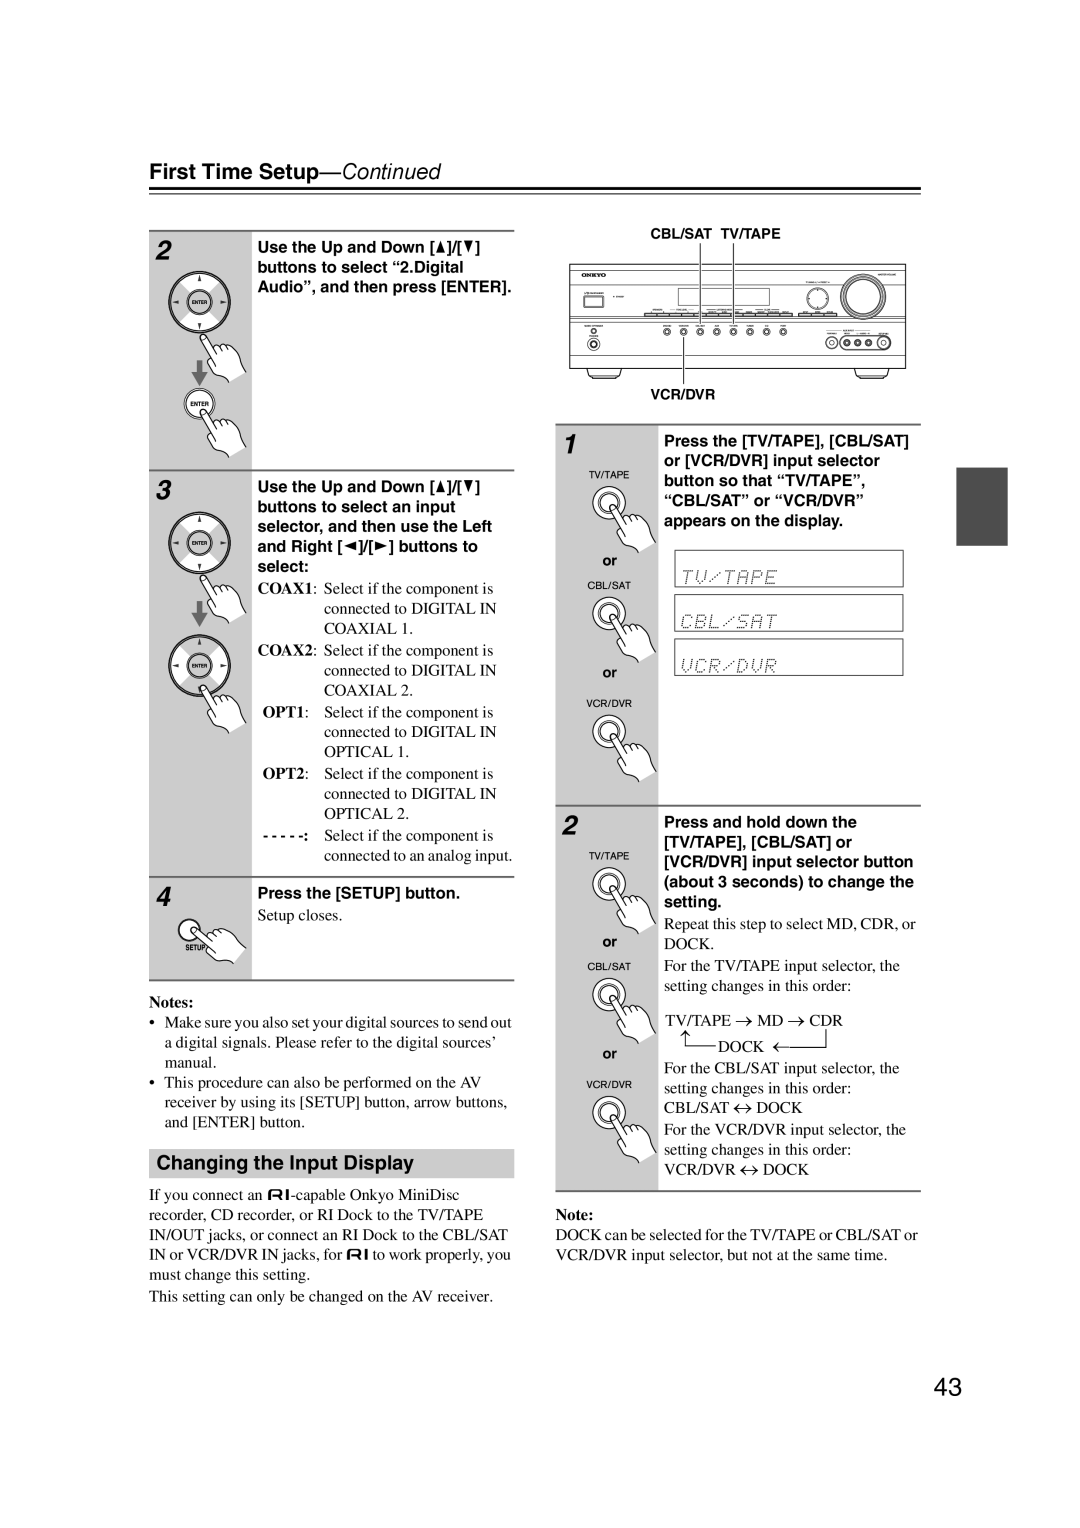 Onkyo HT-S5200 instruction manual Changing the Input Display 